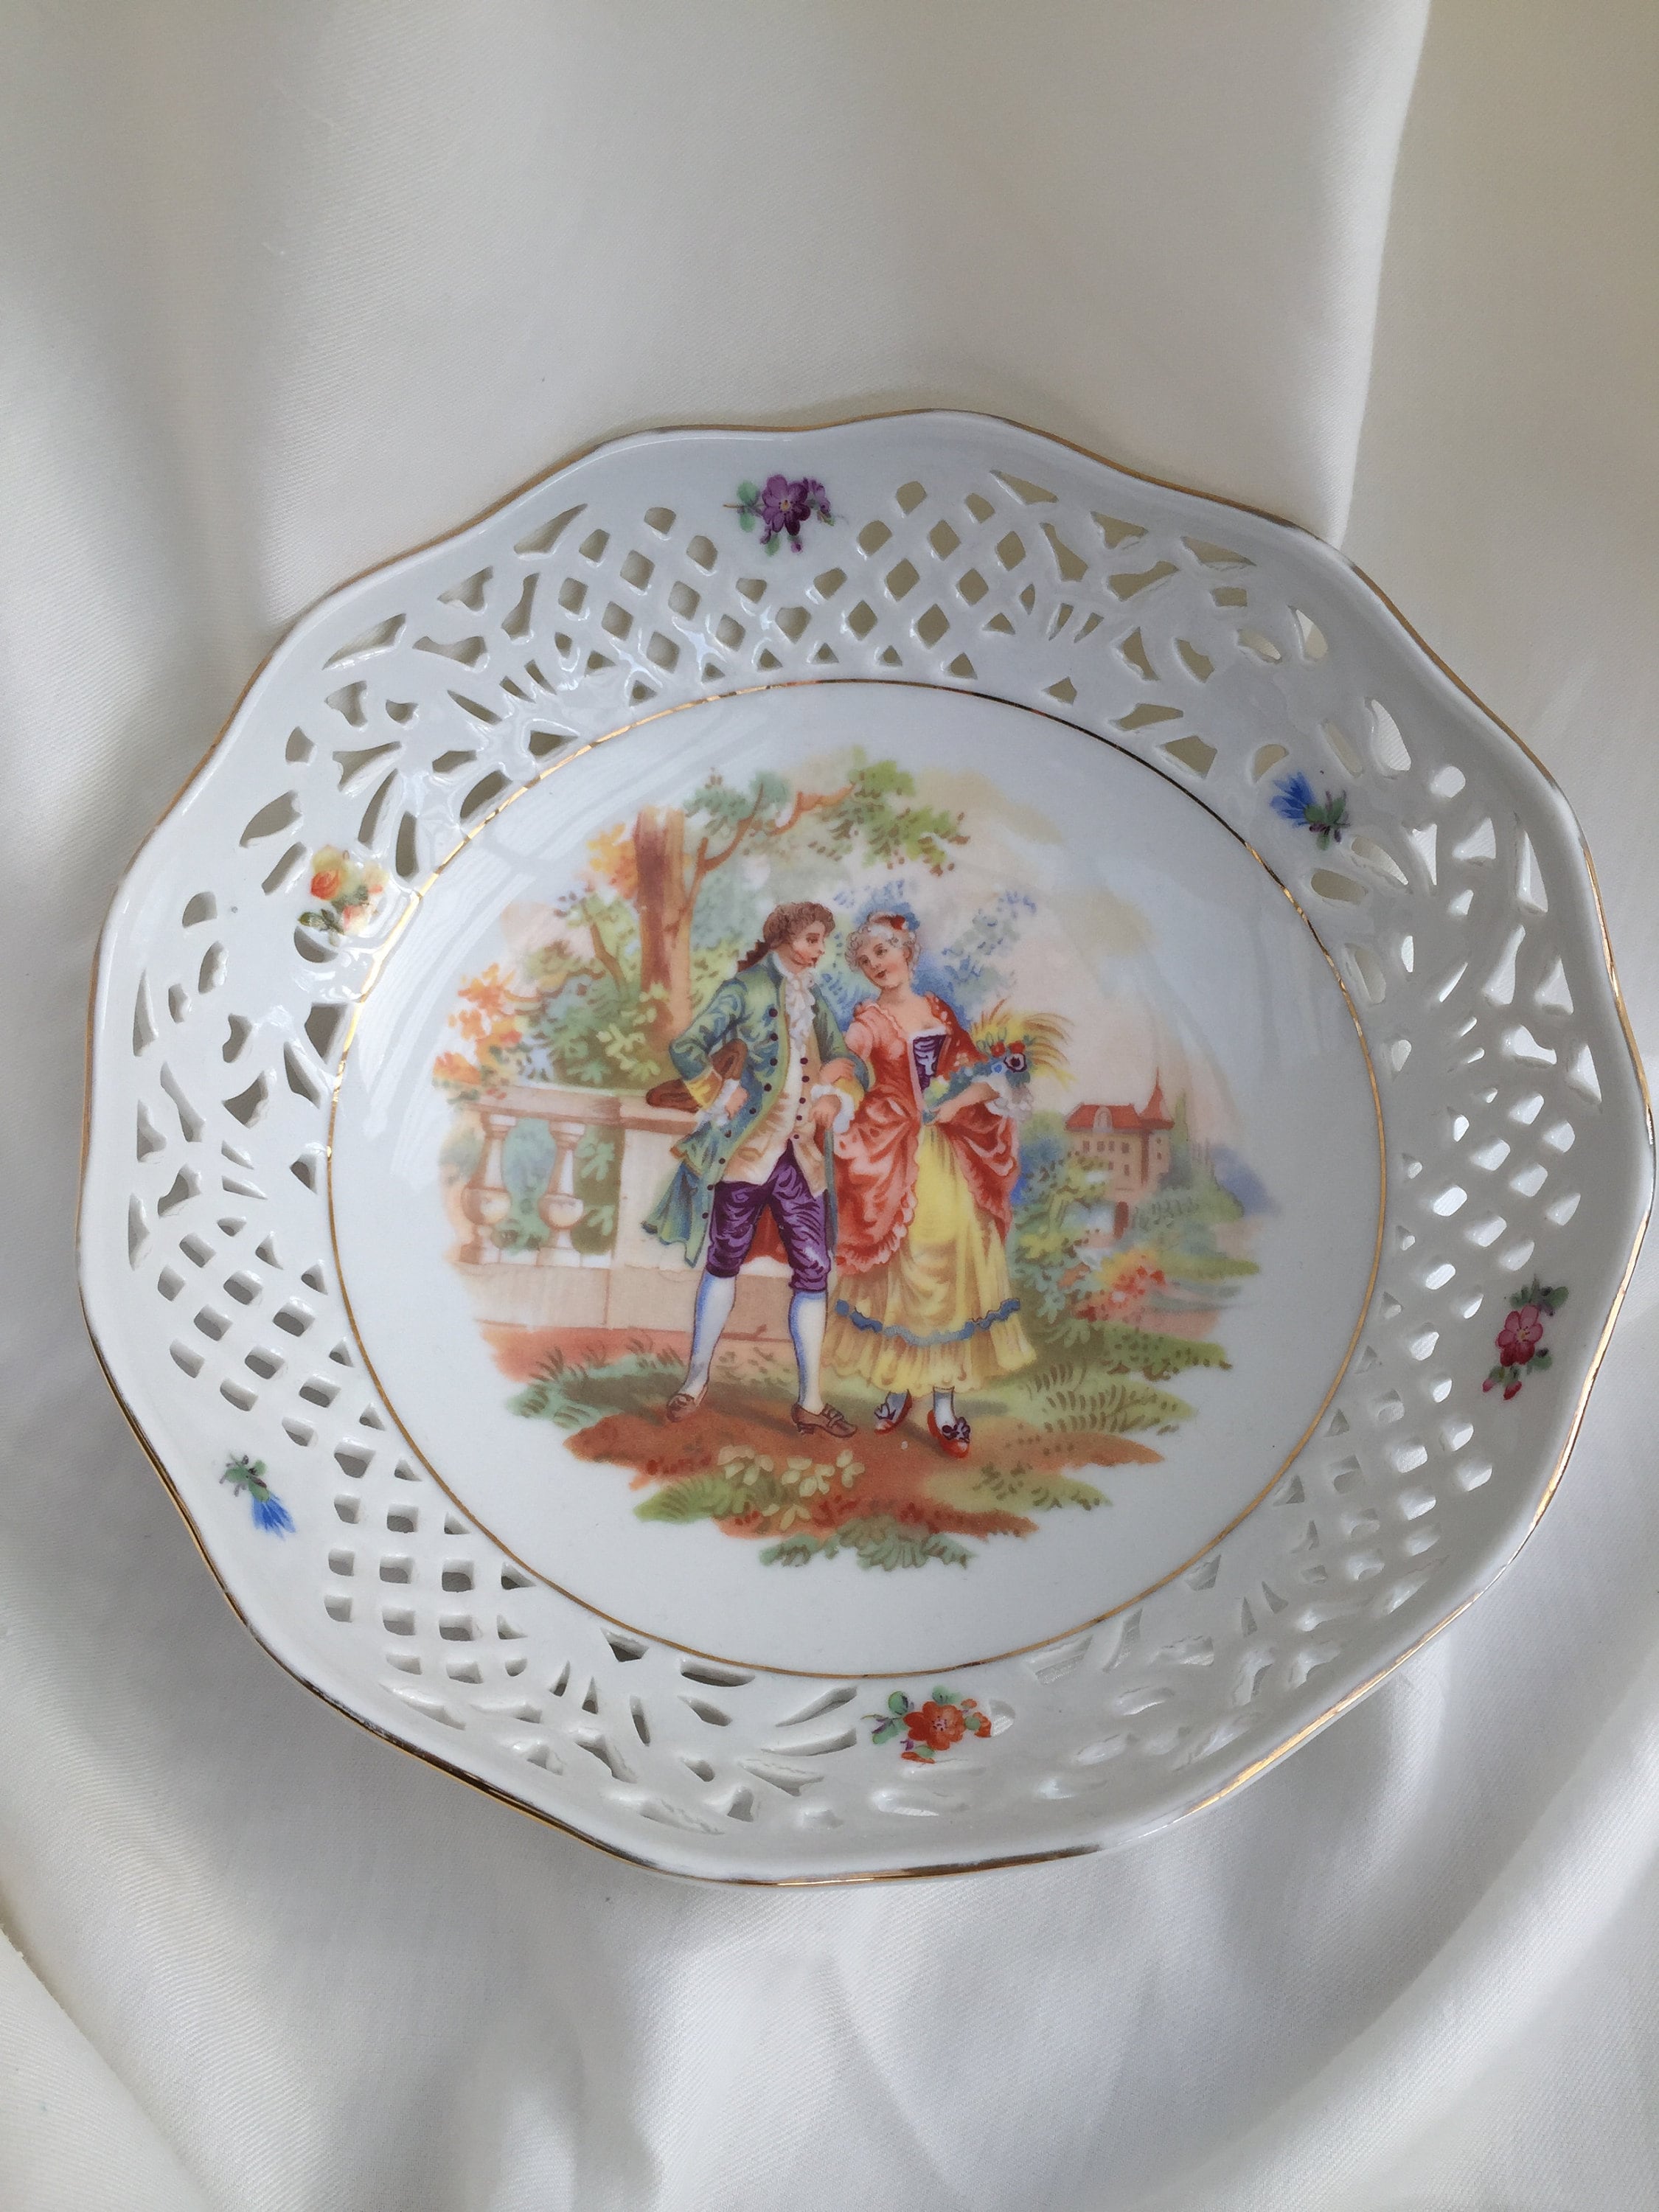 Details about   Vintage Porcelain Souvenir Westminster Abbey  Plate By Schumann Made in Germany 